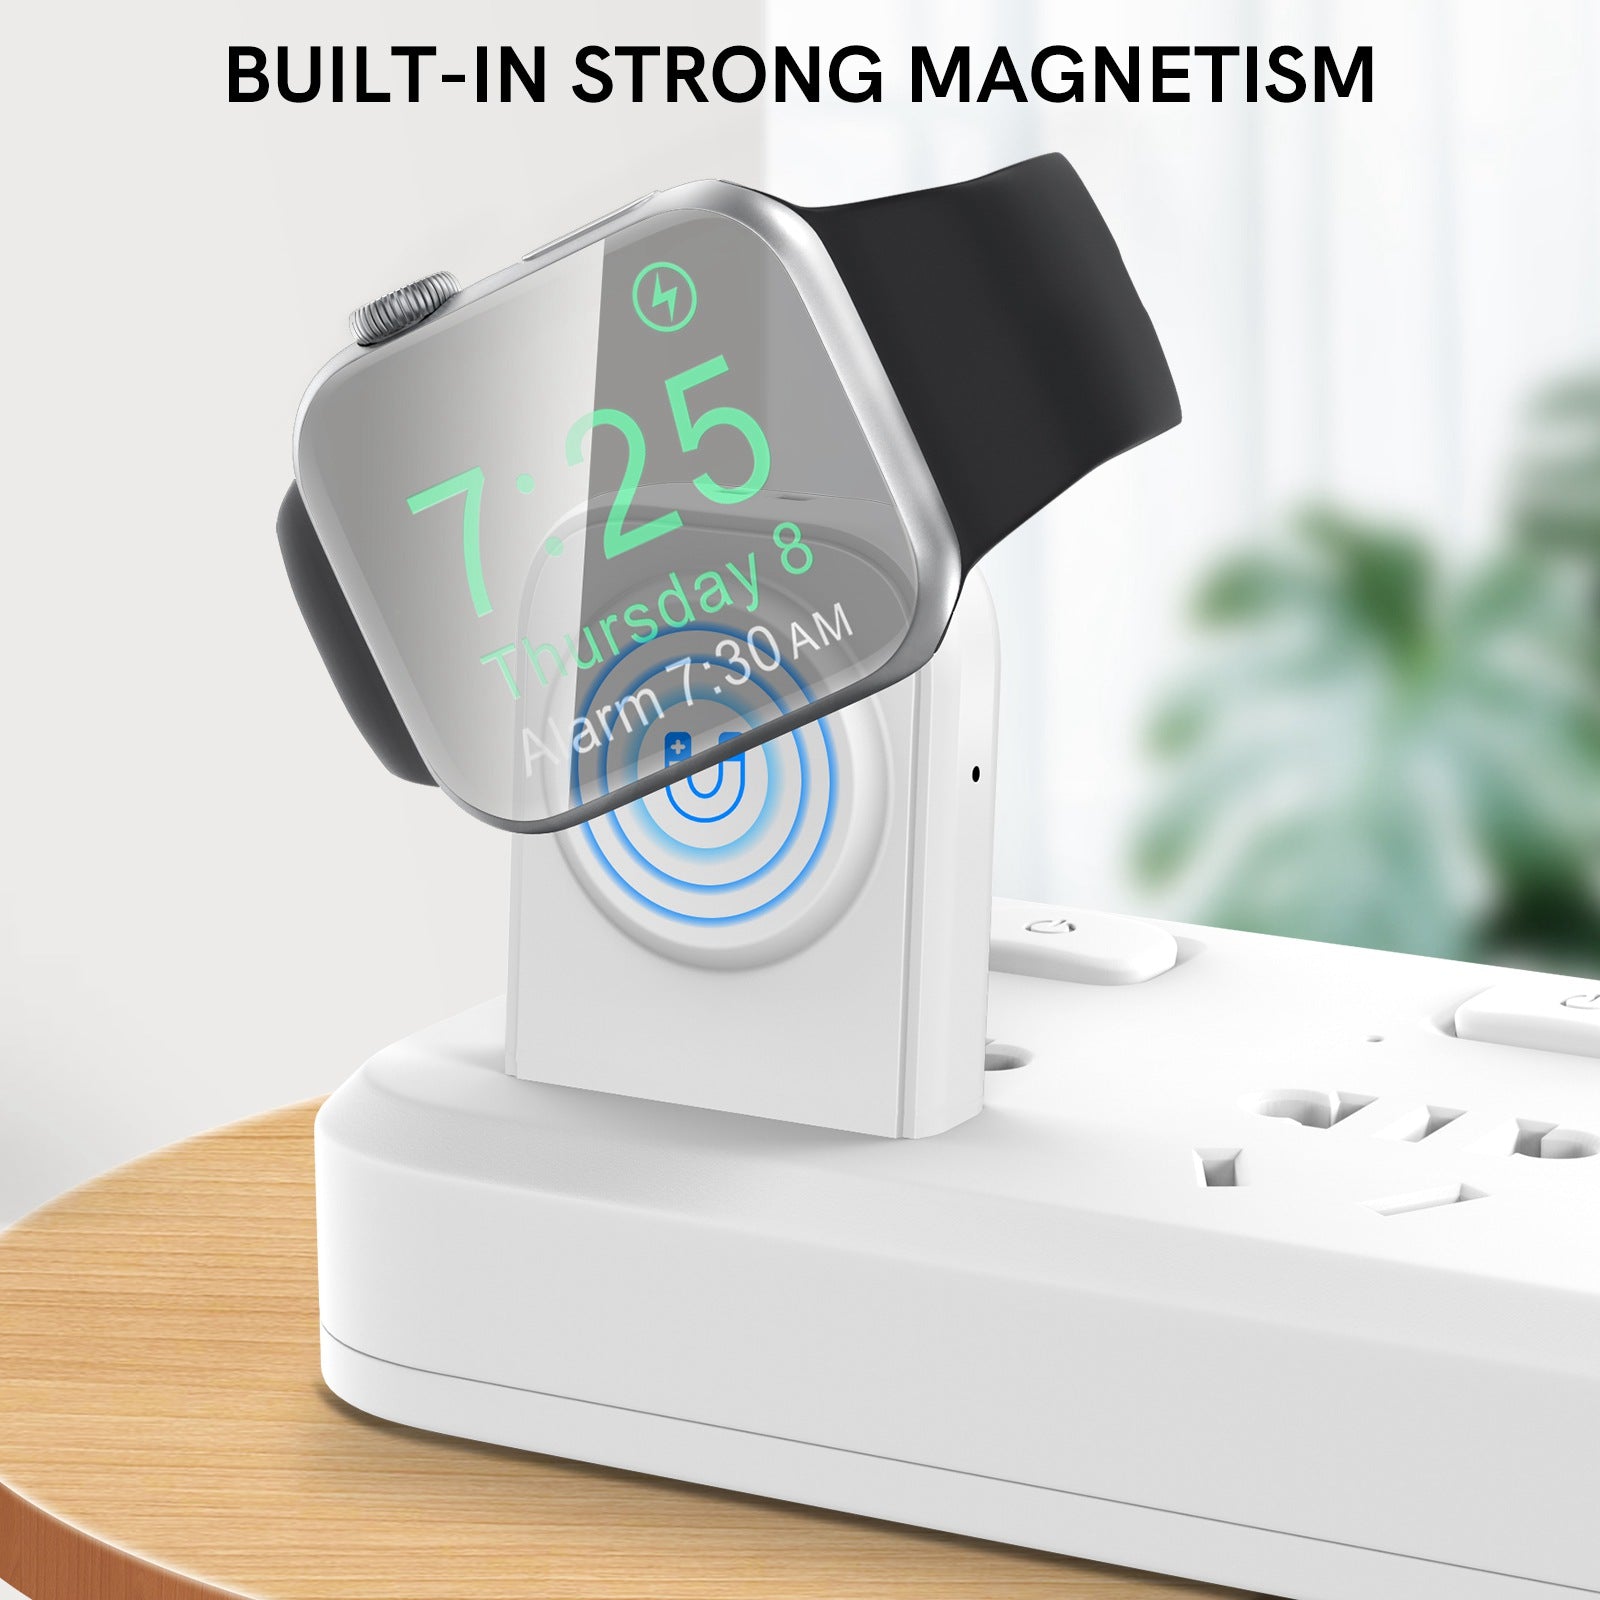 PT143 For Apple Watch 2 in 1 Magnetic Wireless Charger + Base, Height Adjustable - White